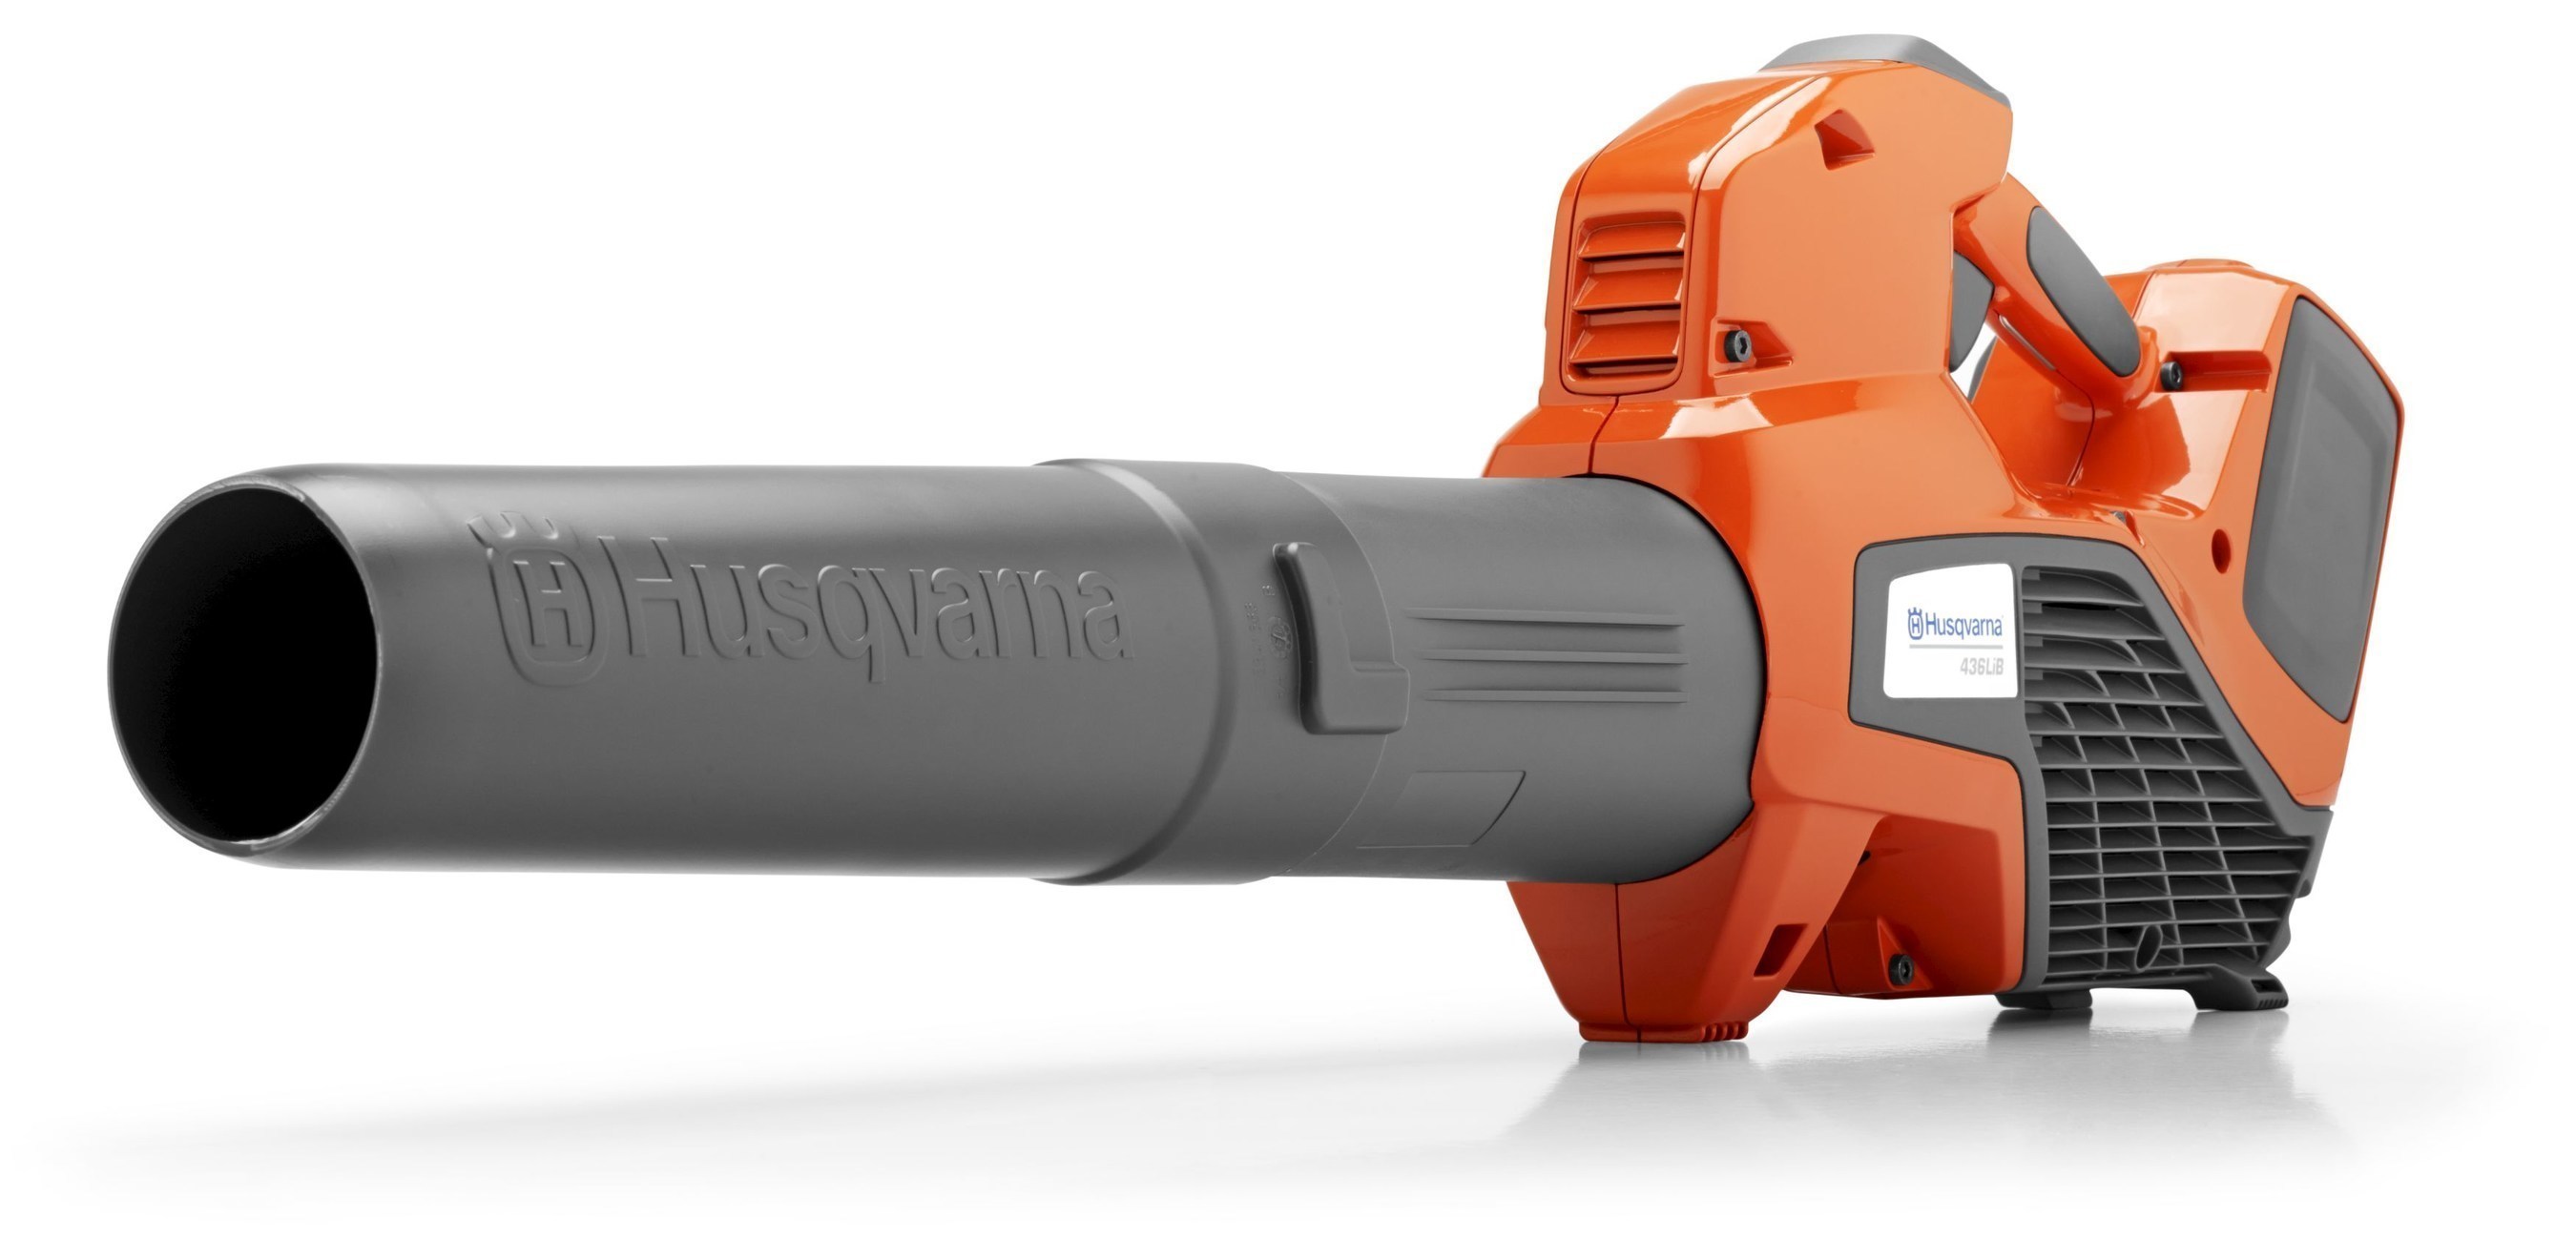 Husqvarna unveils innovative products and services, such as new mowers, battery-powered products, PPE and fleet services, for professional users.